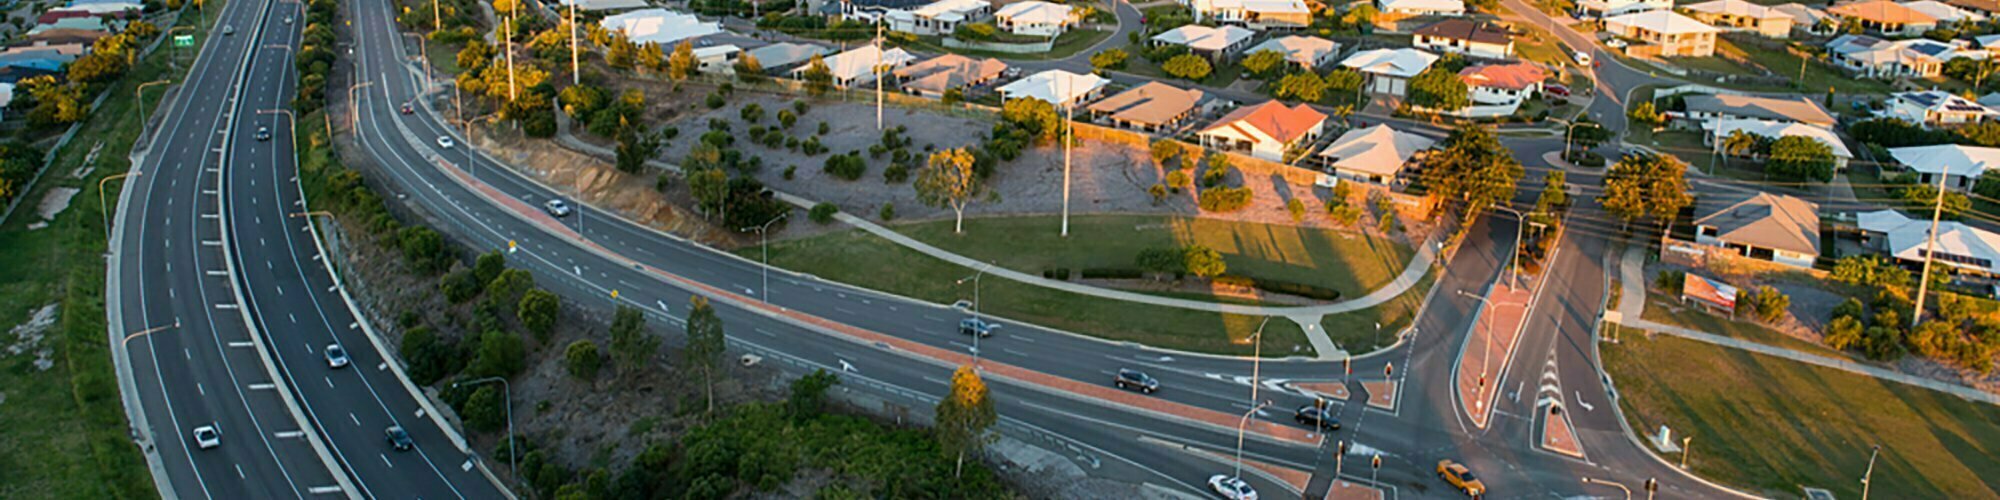 Image for TOWNSVILLE RING ROAD AWARDED TO GEORGIOU